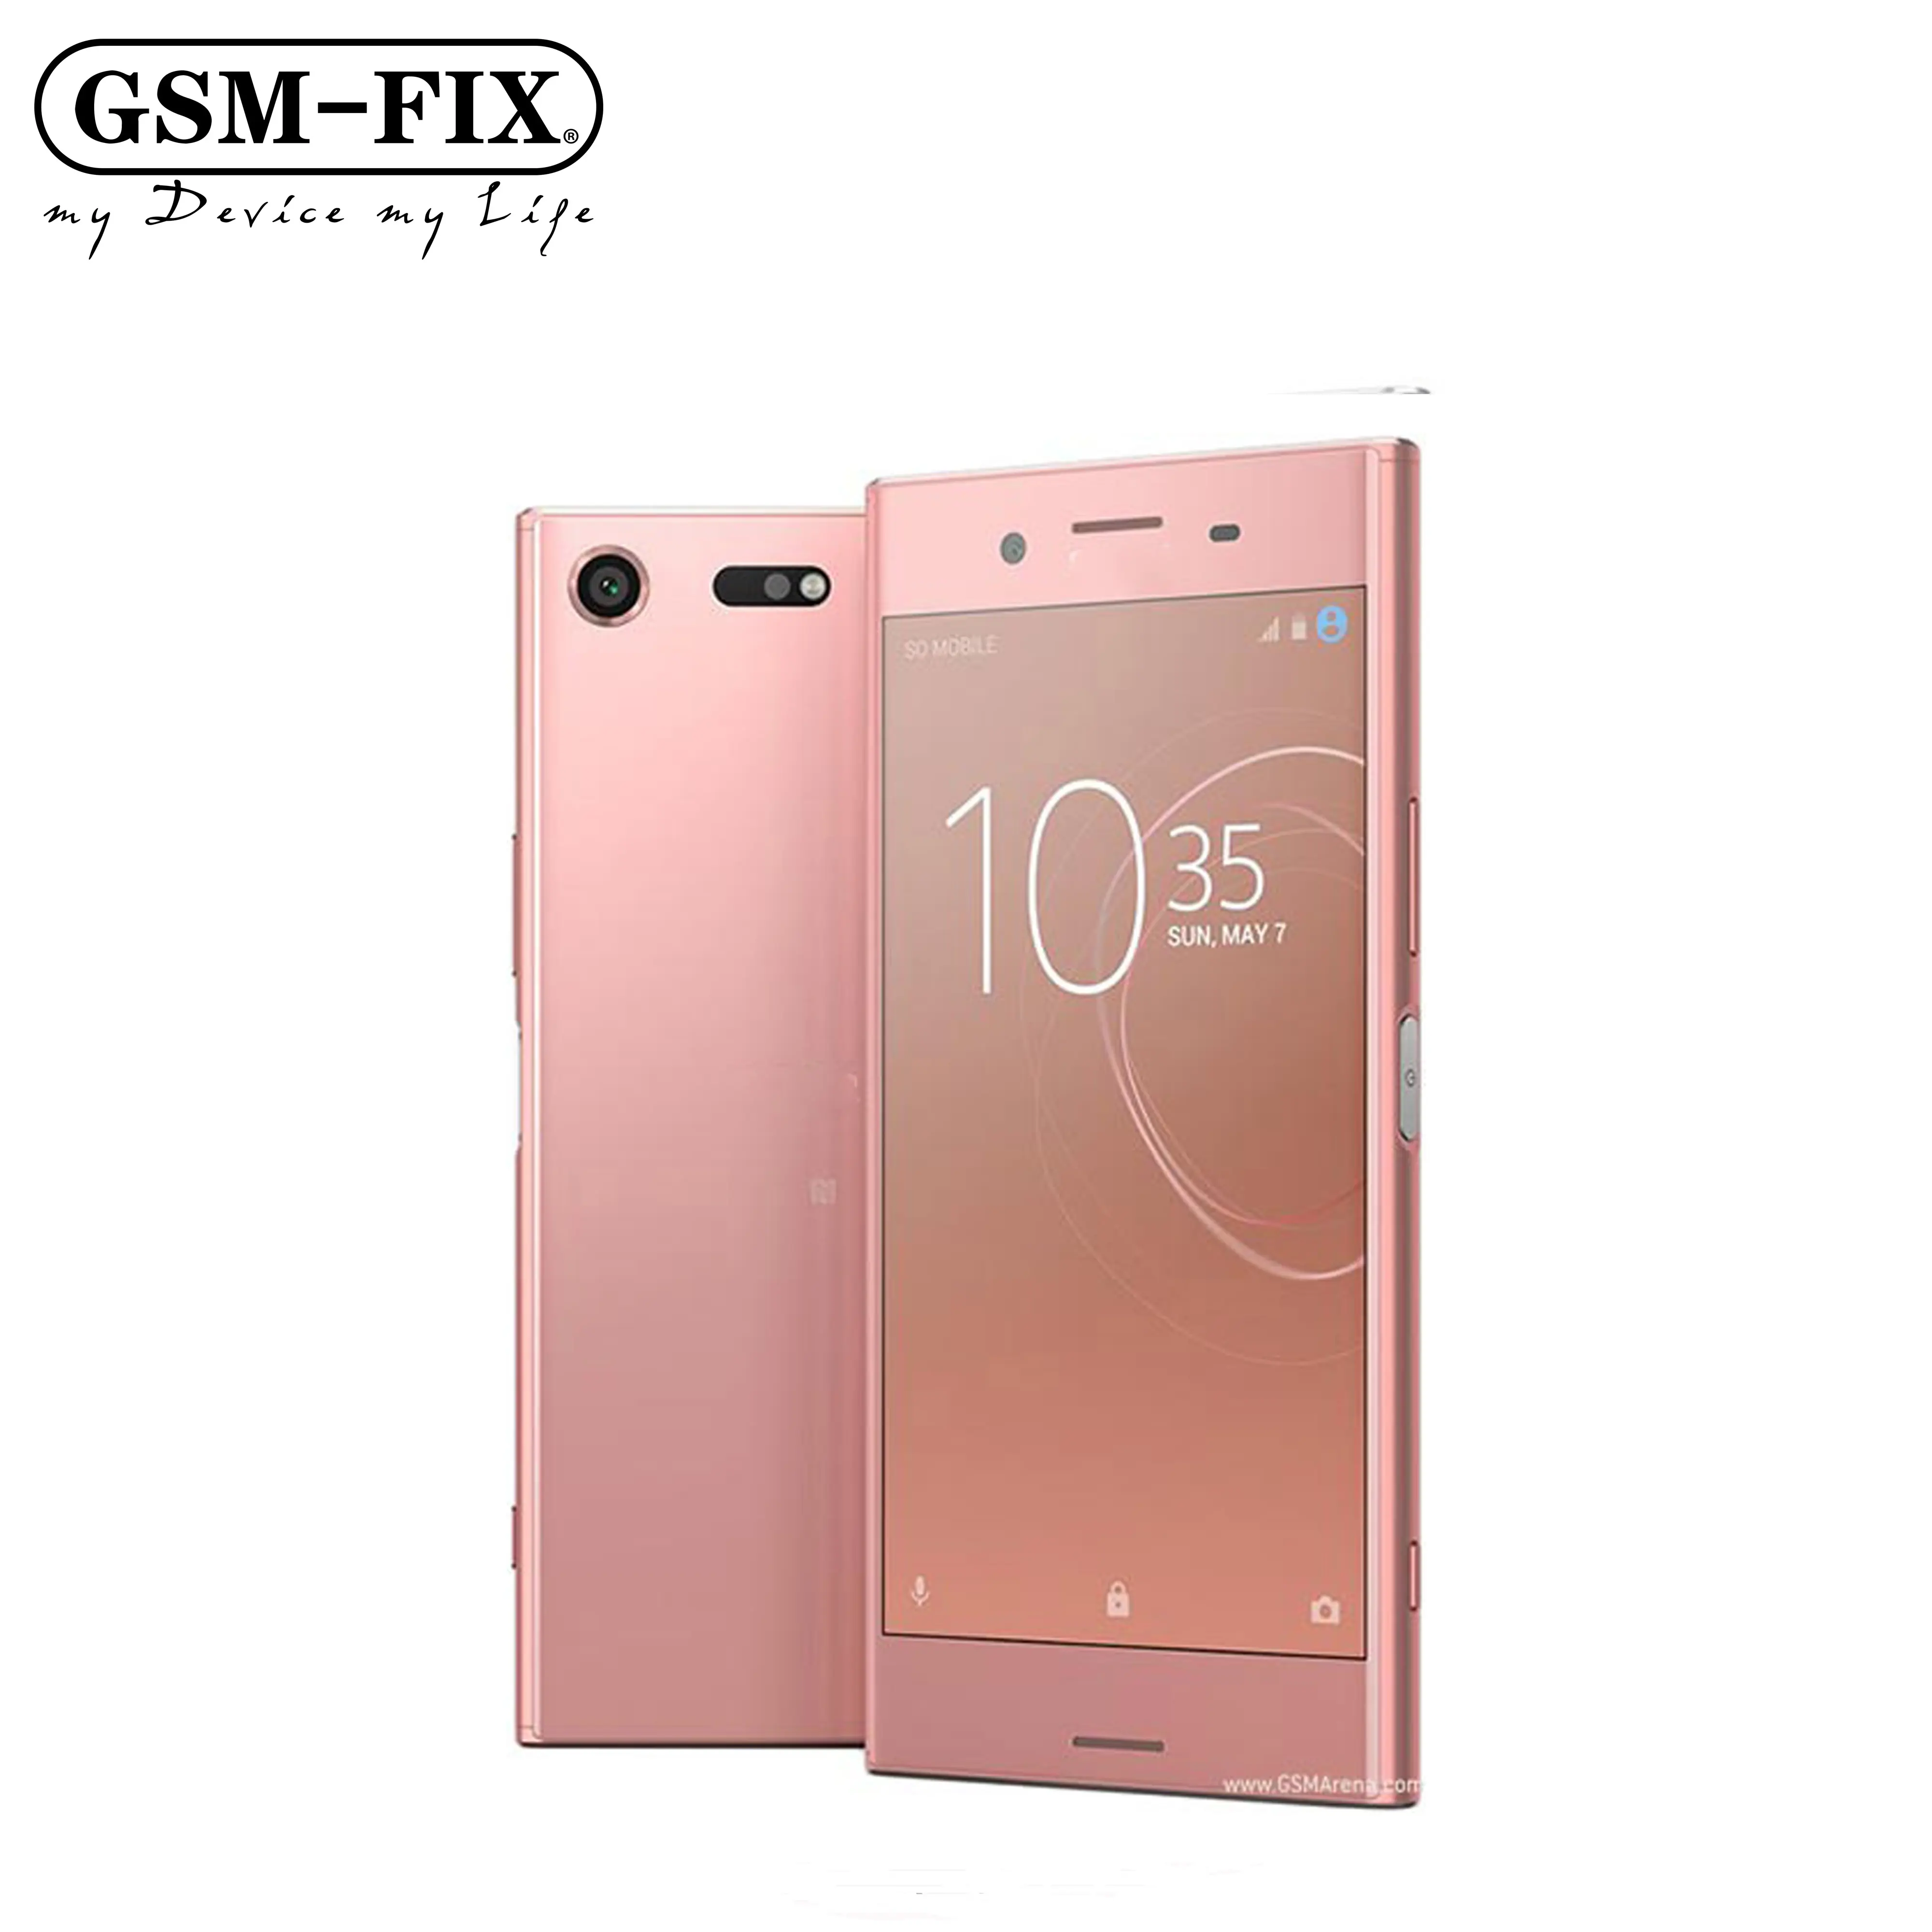 GSM-FIX For Sony Xperia XZ Premium G8141 4G Cell Phone Japan Version RAM 4GB ROM 64GB 5.5" 19MP WIFI GPS Android Smartphone